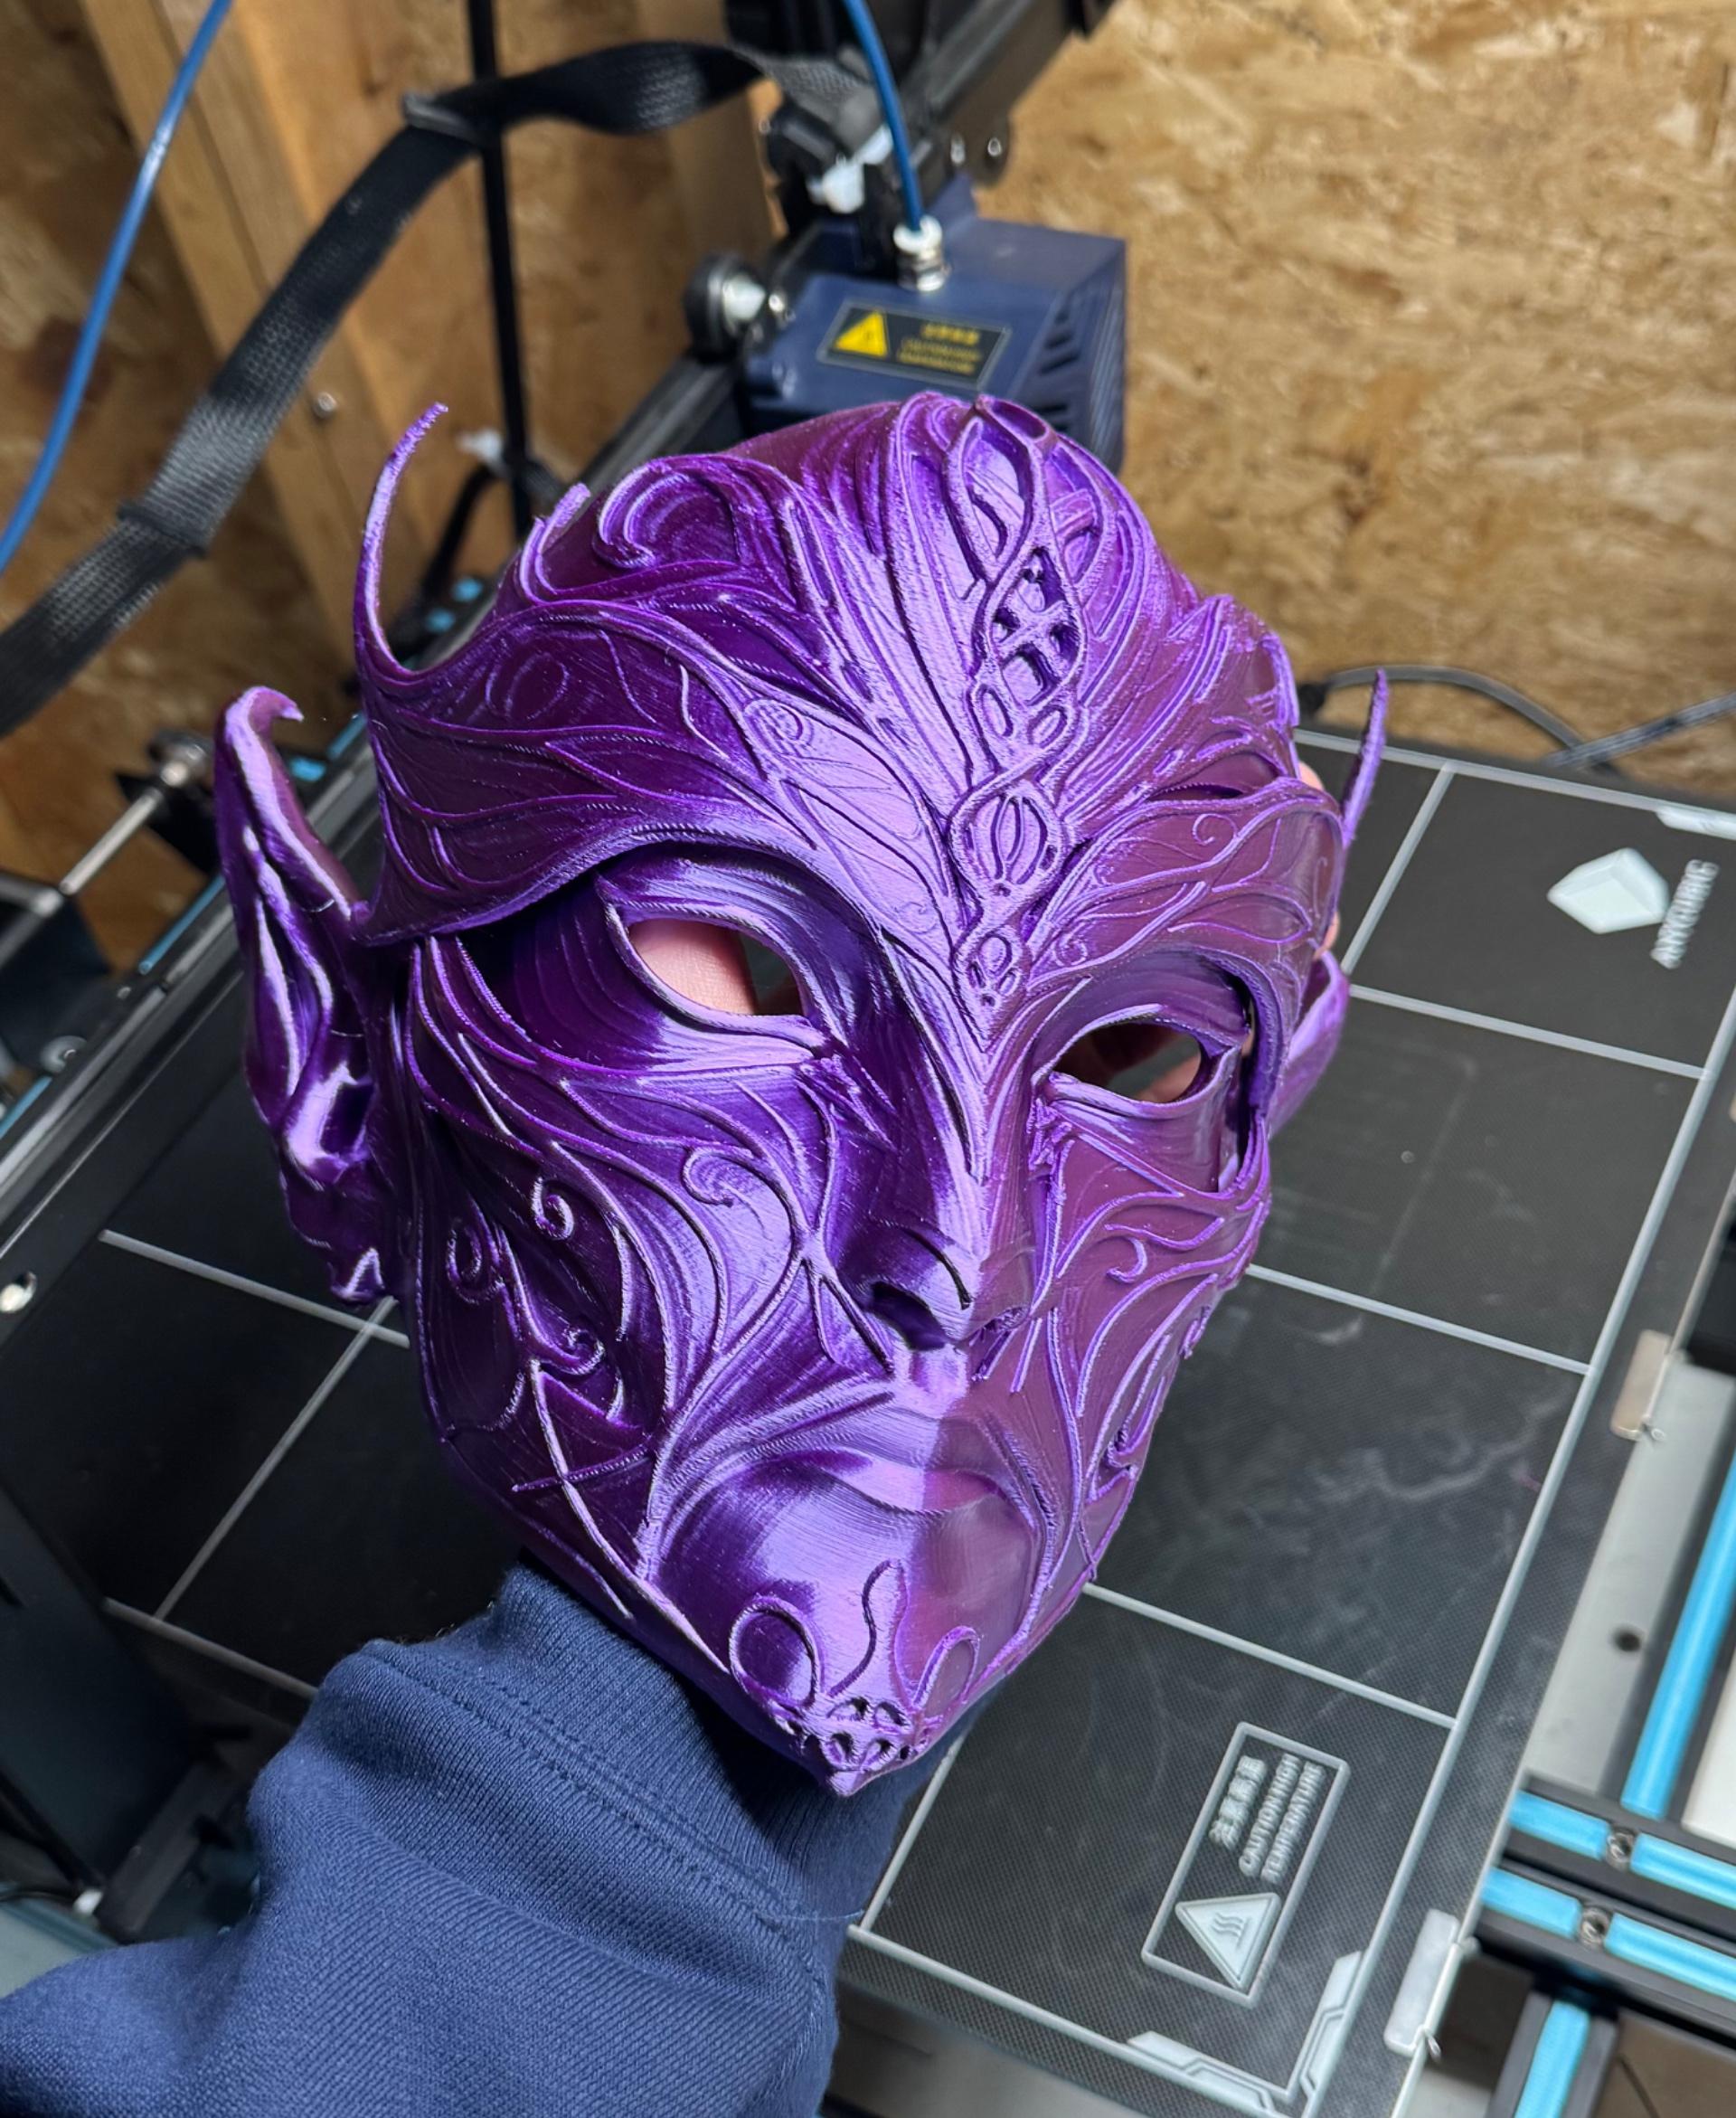 Dark Elf Mask - Subscribed for this mask alone🤯 - 3d model